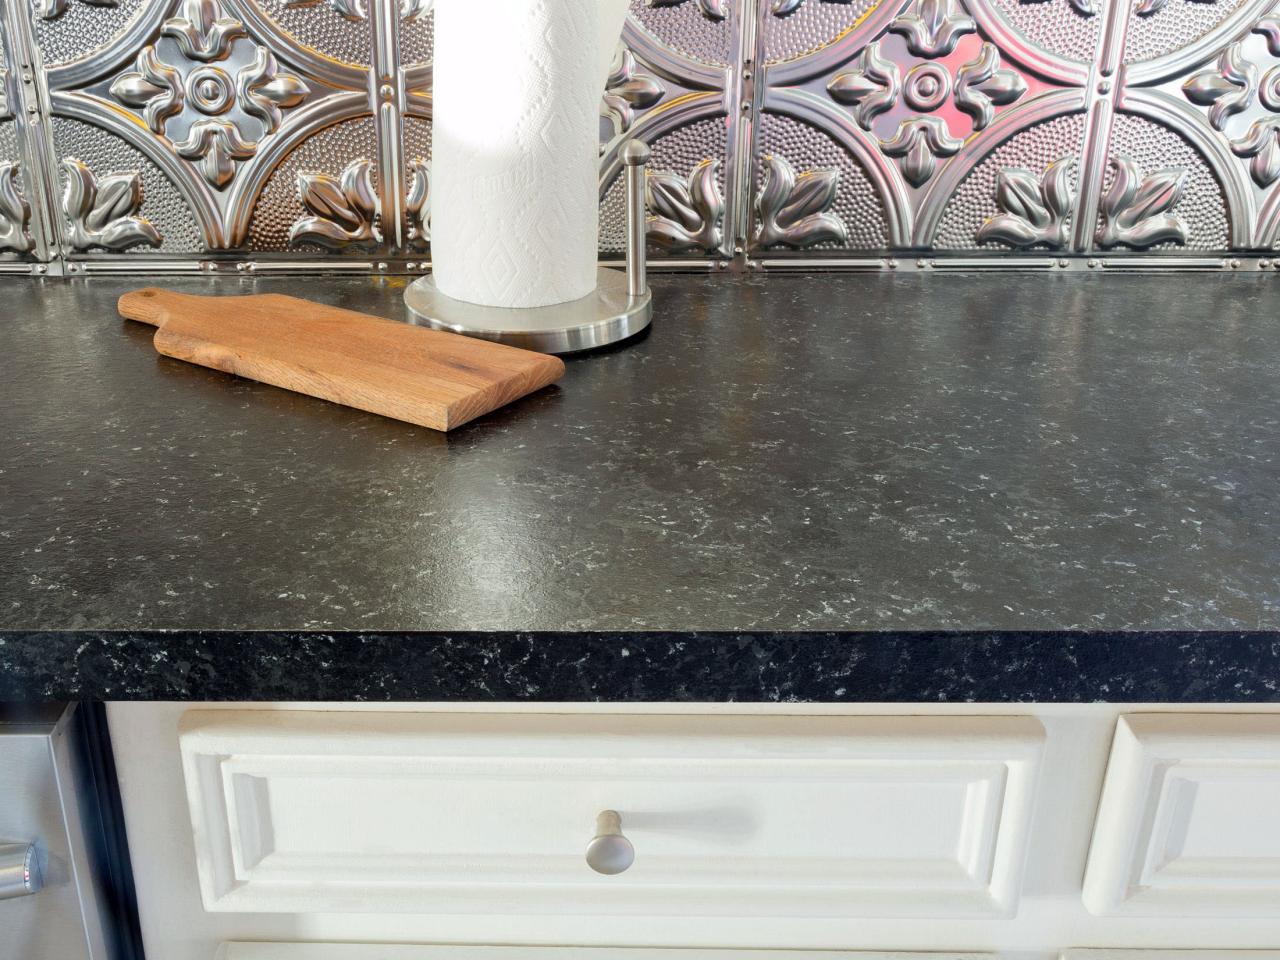 How To Paint A Laminate Countertop, How To Faux Paint Countertops